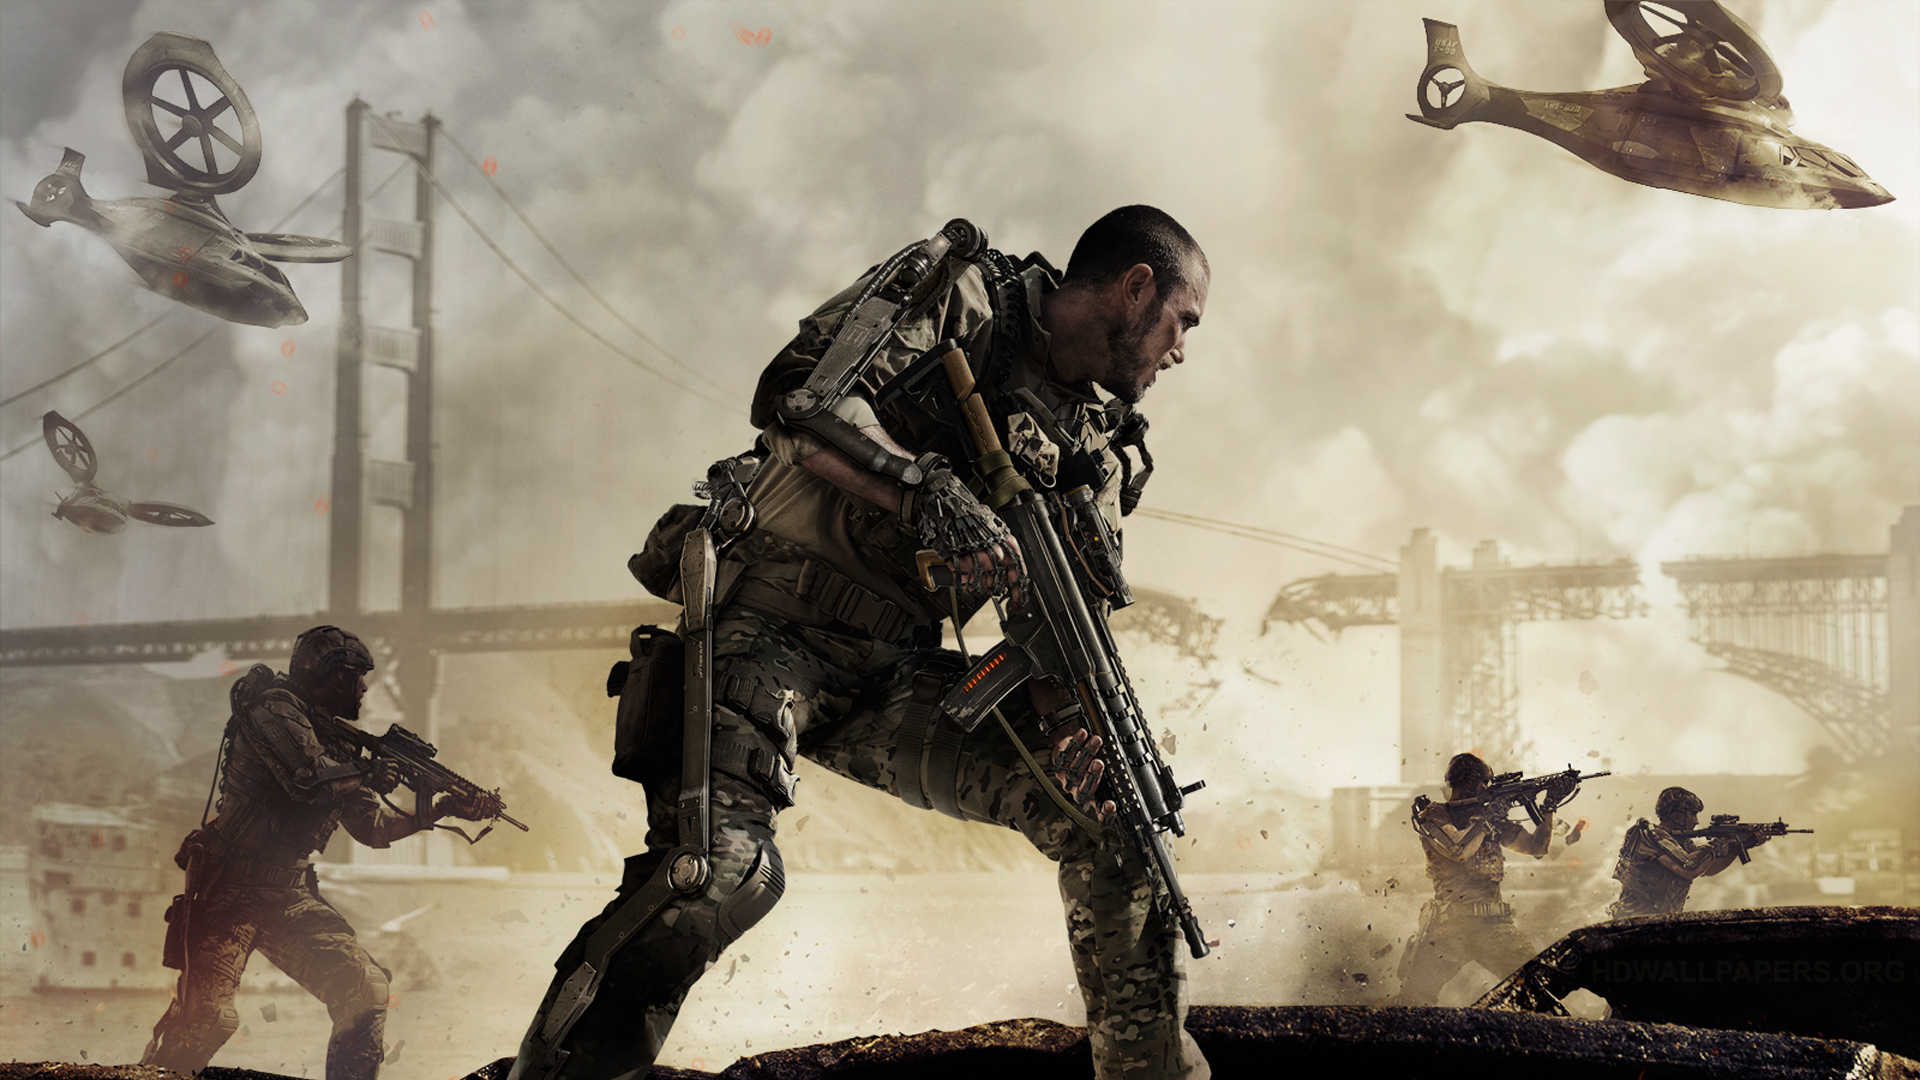 Want to play Call of Duty Advanced Warfare on Day Zero with the celebs?